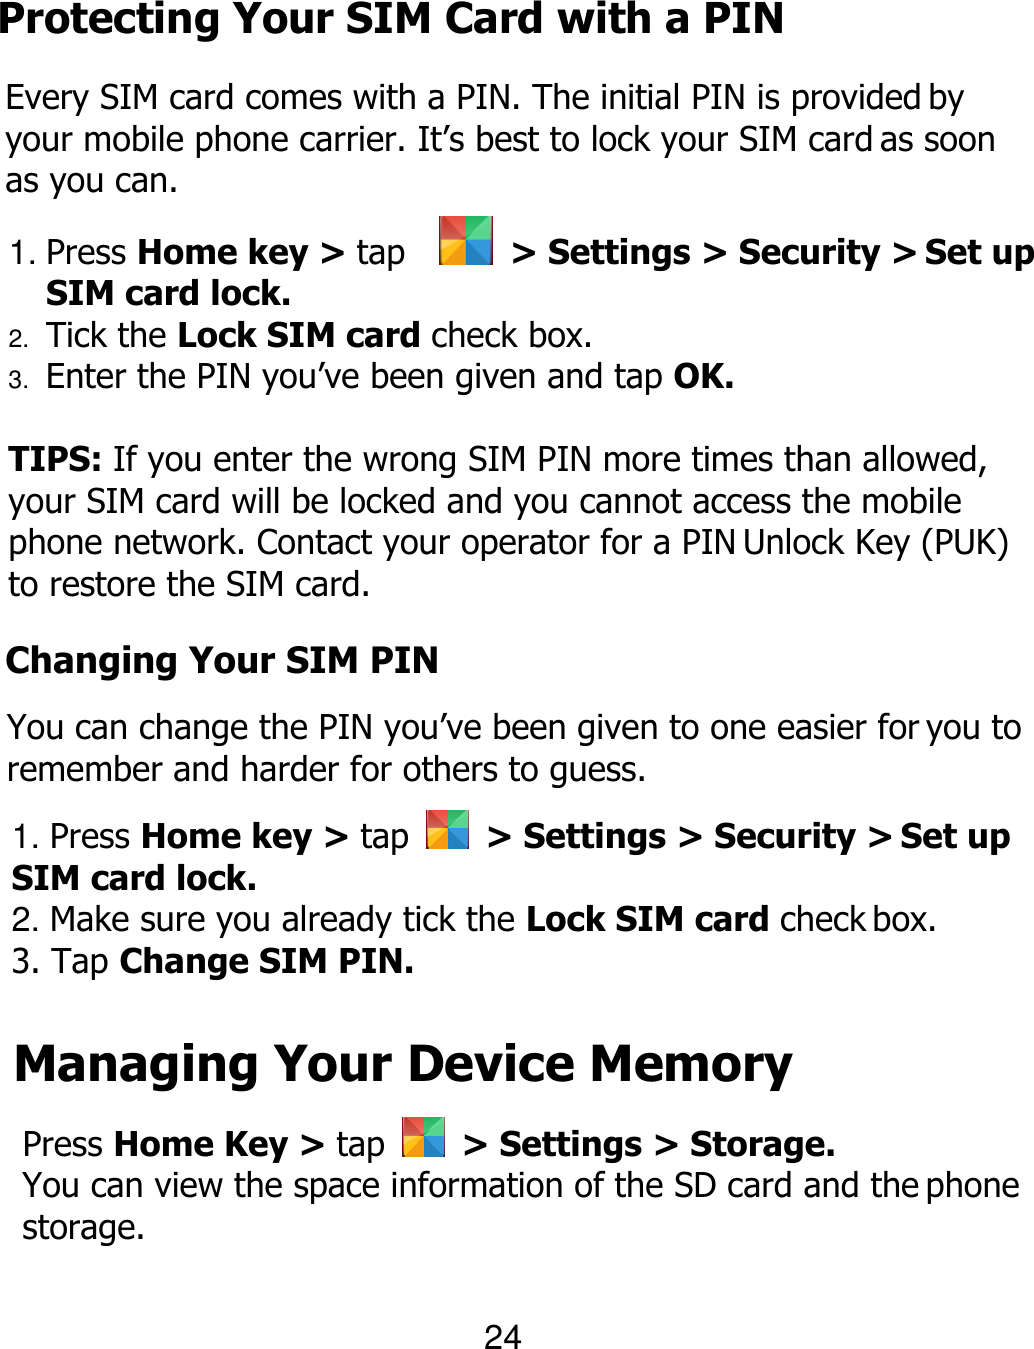 Protecting Your SIM Card with a PIN Every SIM card comes with a PIN. The initial PIN is provided by your mobile phone carrier. It’s best to lock your SIM card as soon as you can. 1. Press Home key &gt; tap    &gt; Settings &gt; Security &gt; Set up SIM card lock. 2. Tick the Lock SIM card check box. 3. Enter the PIN you’ve been given and tap OK.  TIPS: If you enter the wrong SIM PIN more times than allowed, your SIM card will be locked and you cannot access the mobile phone network. Contact your operator for a PIN Unlock Key (PUK) to restore the SIM card. 24 Changing Your SIM PIN You can change the PIN you’ve been given to one easier for you to remember and harder for others to guess. 1. Press Home key &gt; tap    &gt; Settings &gt; Security &gt; Set up SIM card lock. 2. Make sure you already tick the Lock SIM card check box. 3. Tap Change SIM PIN. Managing Your Device Memory Press Home Key &gt; tap    &gt; Settings &gt; Storage. You can view the space information of the SD card and the phone storage. 